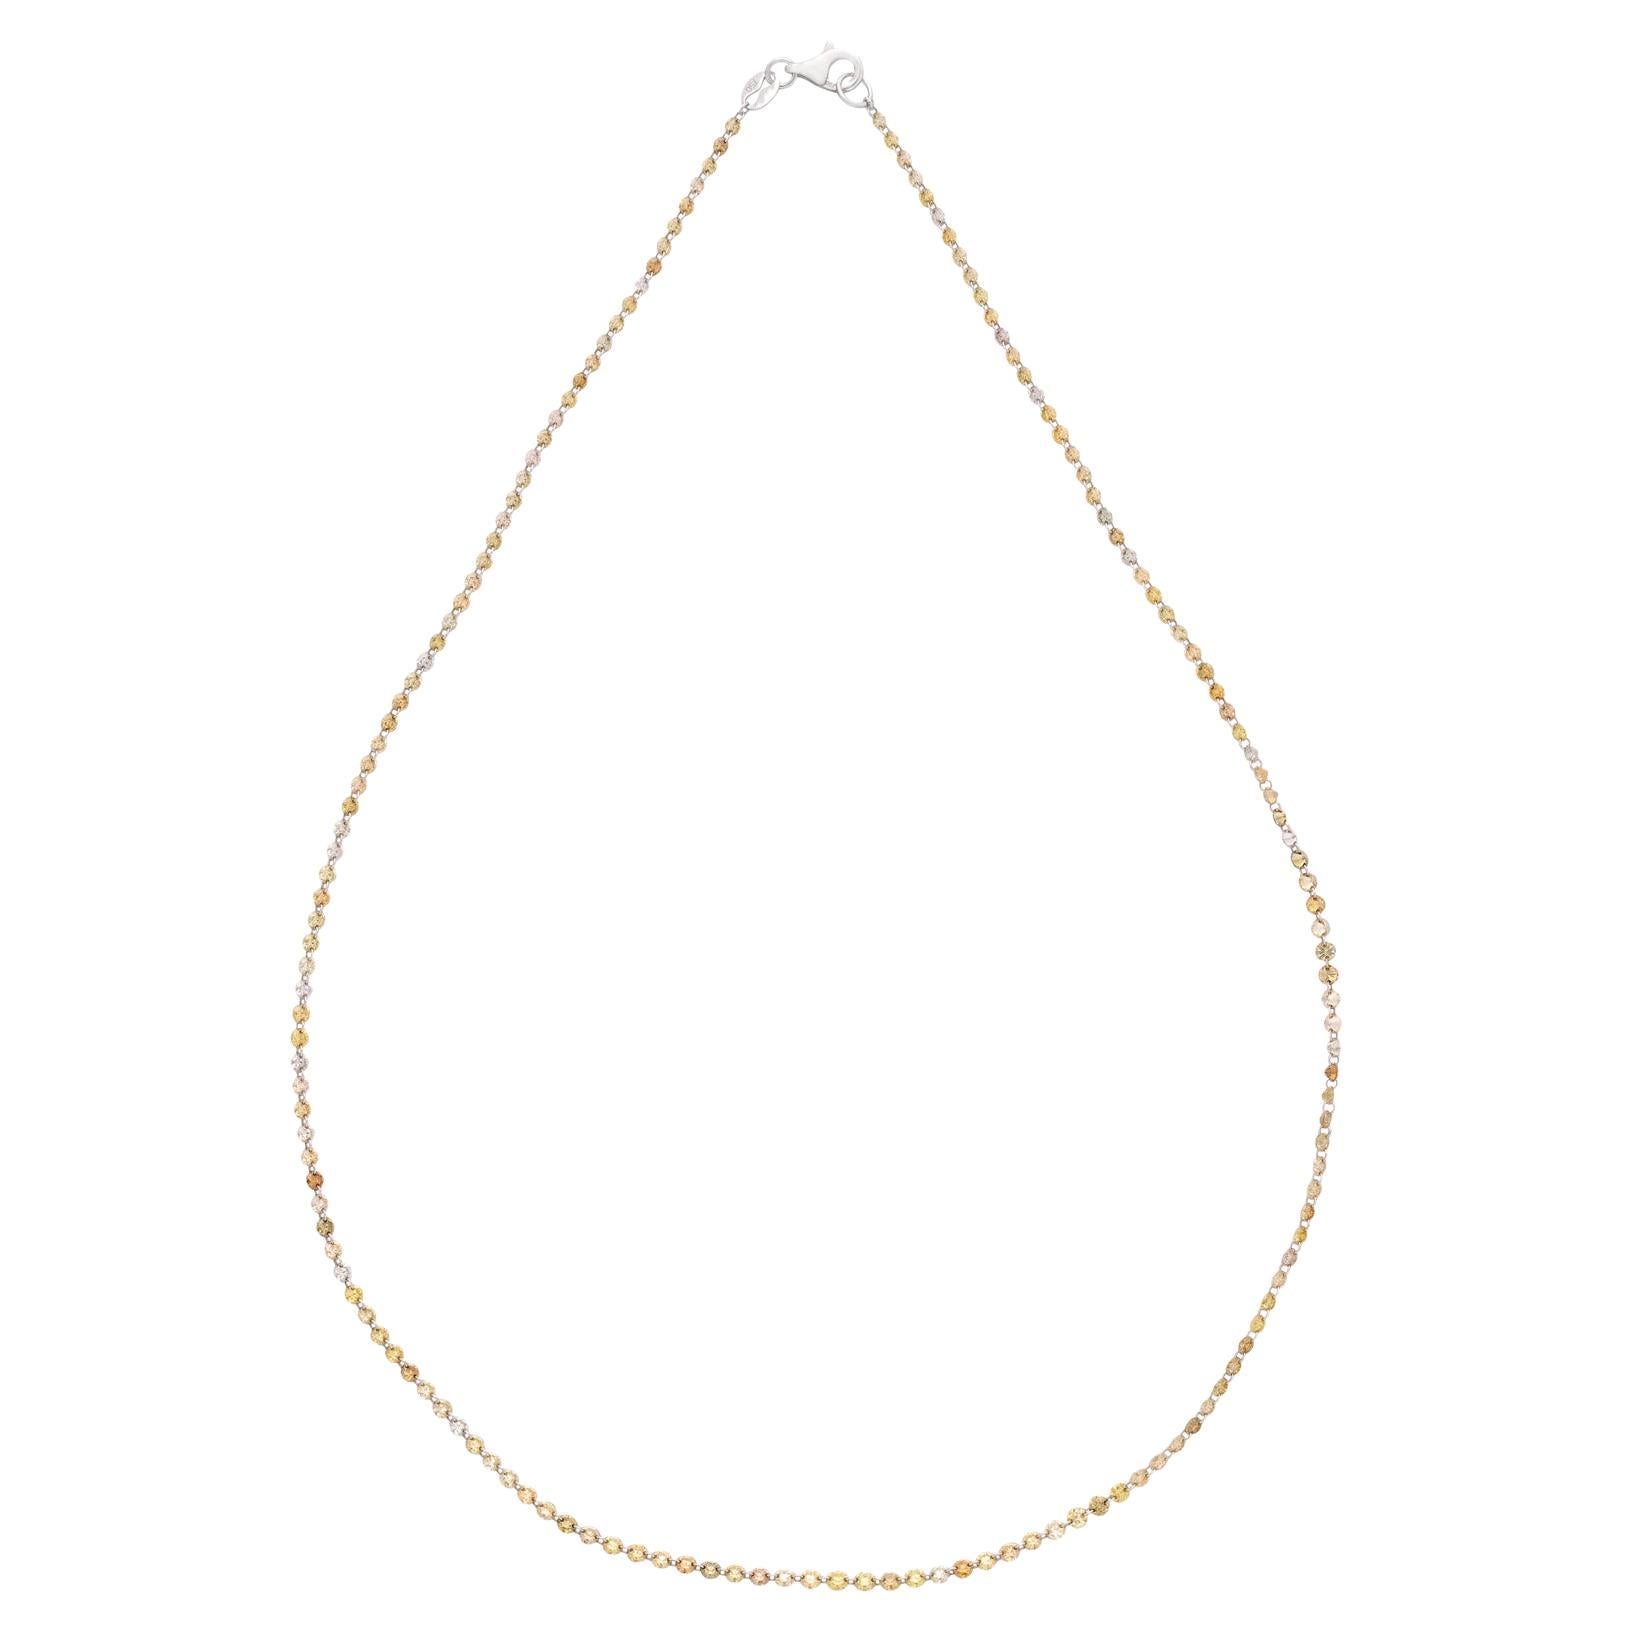 Yellow, White & Champagne 18kt Diamond Necklace